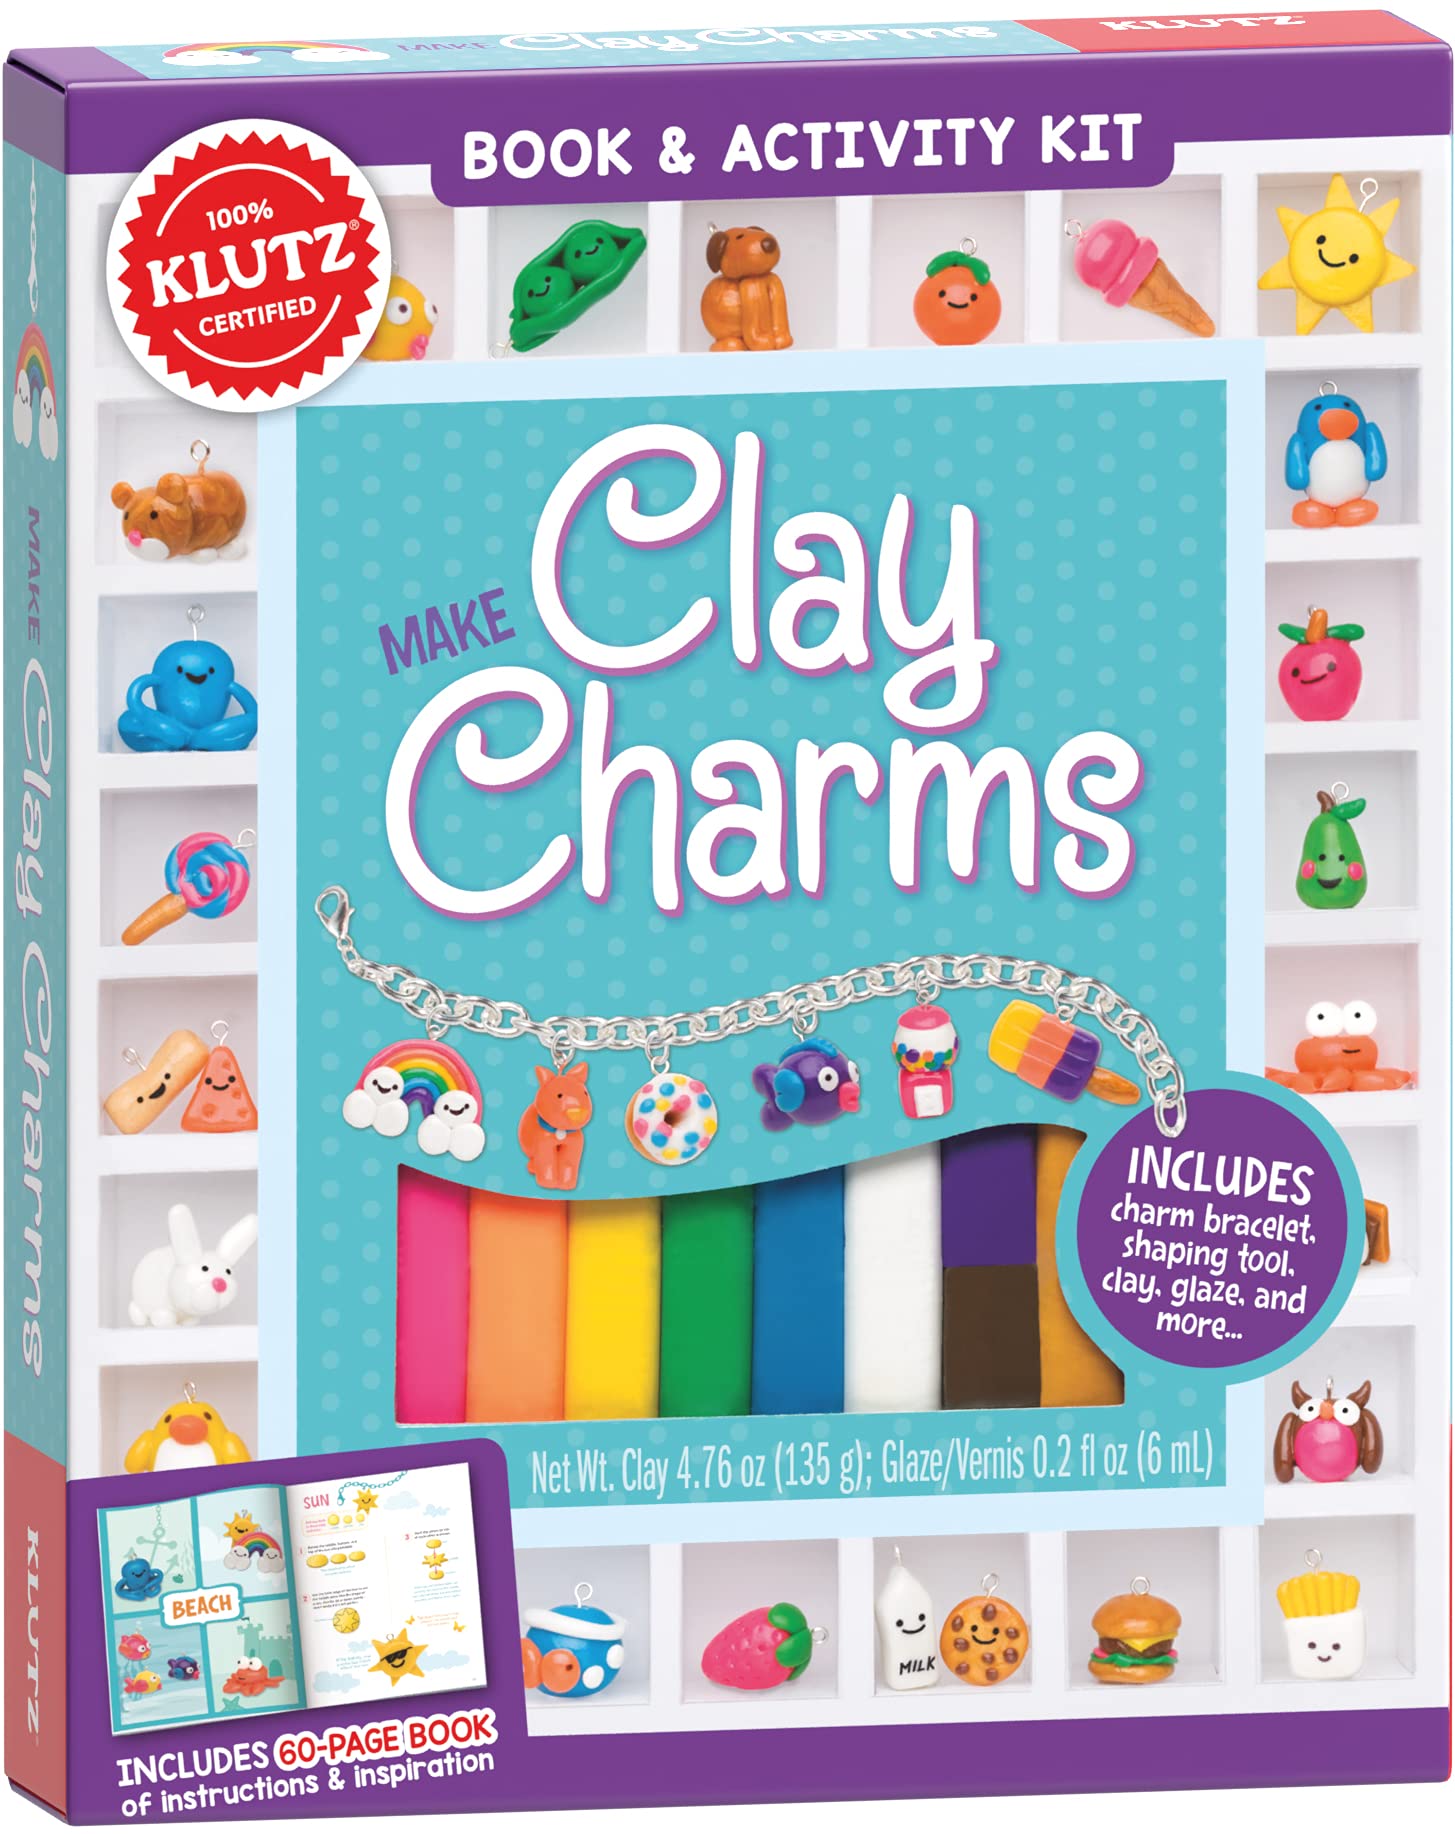 Make Clay Charms (Klutz Craft Kit) 8" Length x 1.19" Width x 9" Height